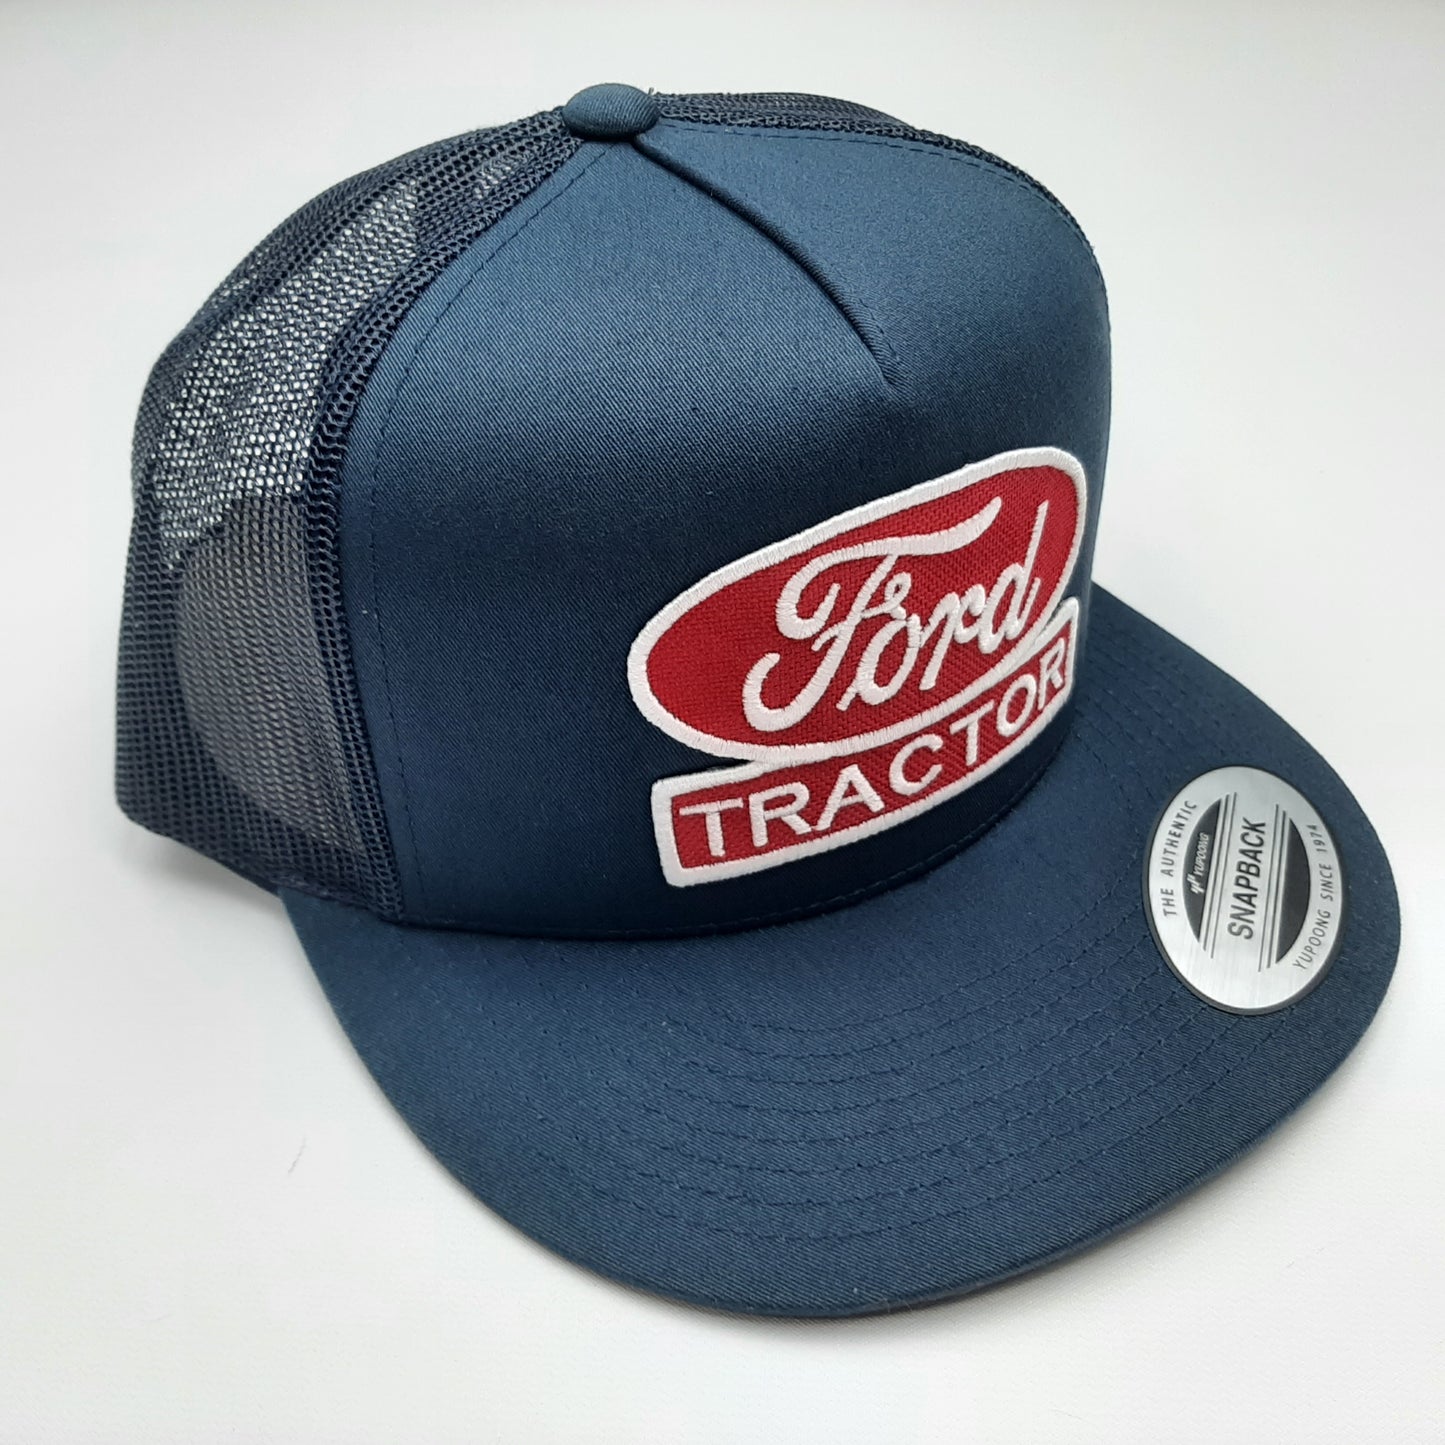 Ford Tractor Embroidered Patch Flat Bill Snapback Mesh Hat Cap Blue Yupoong